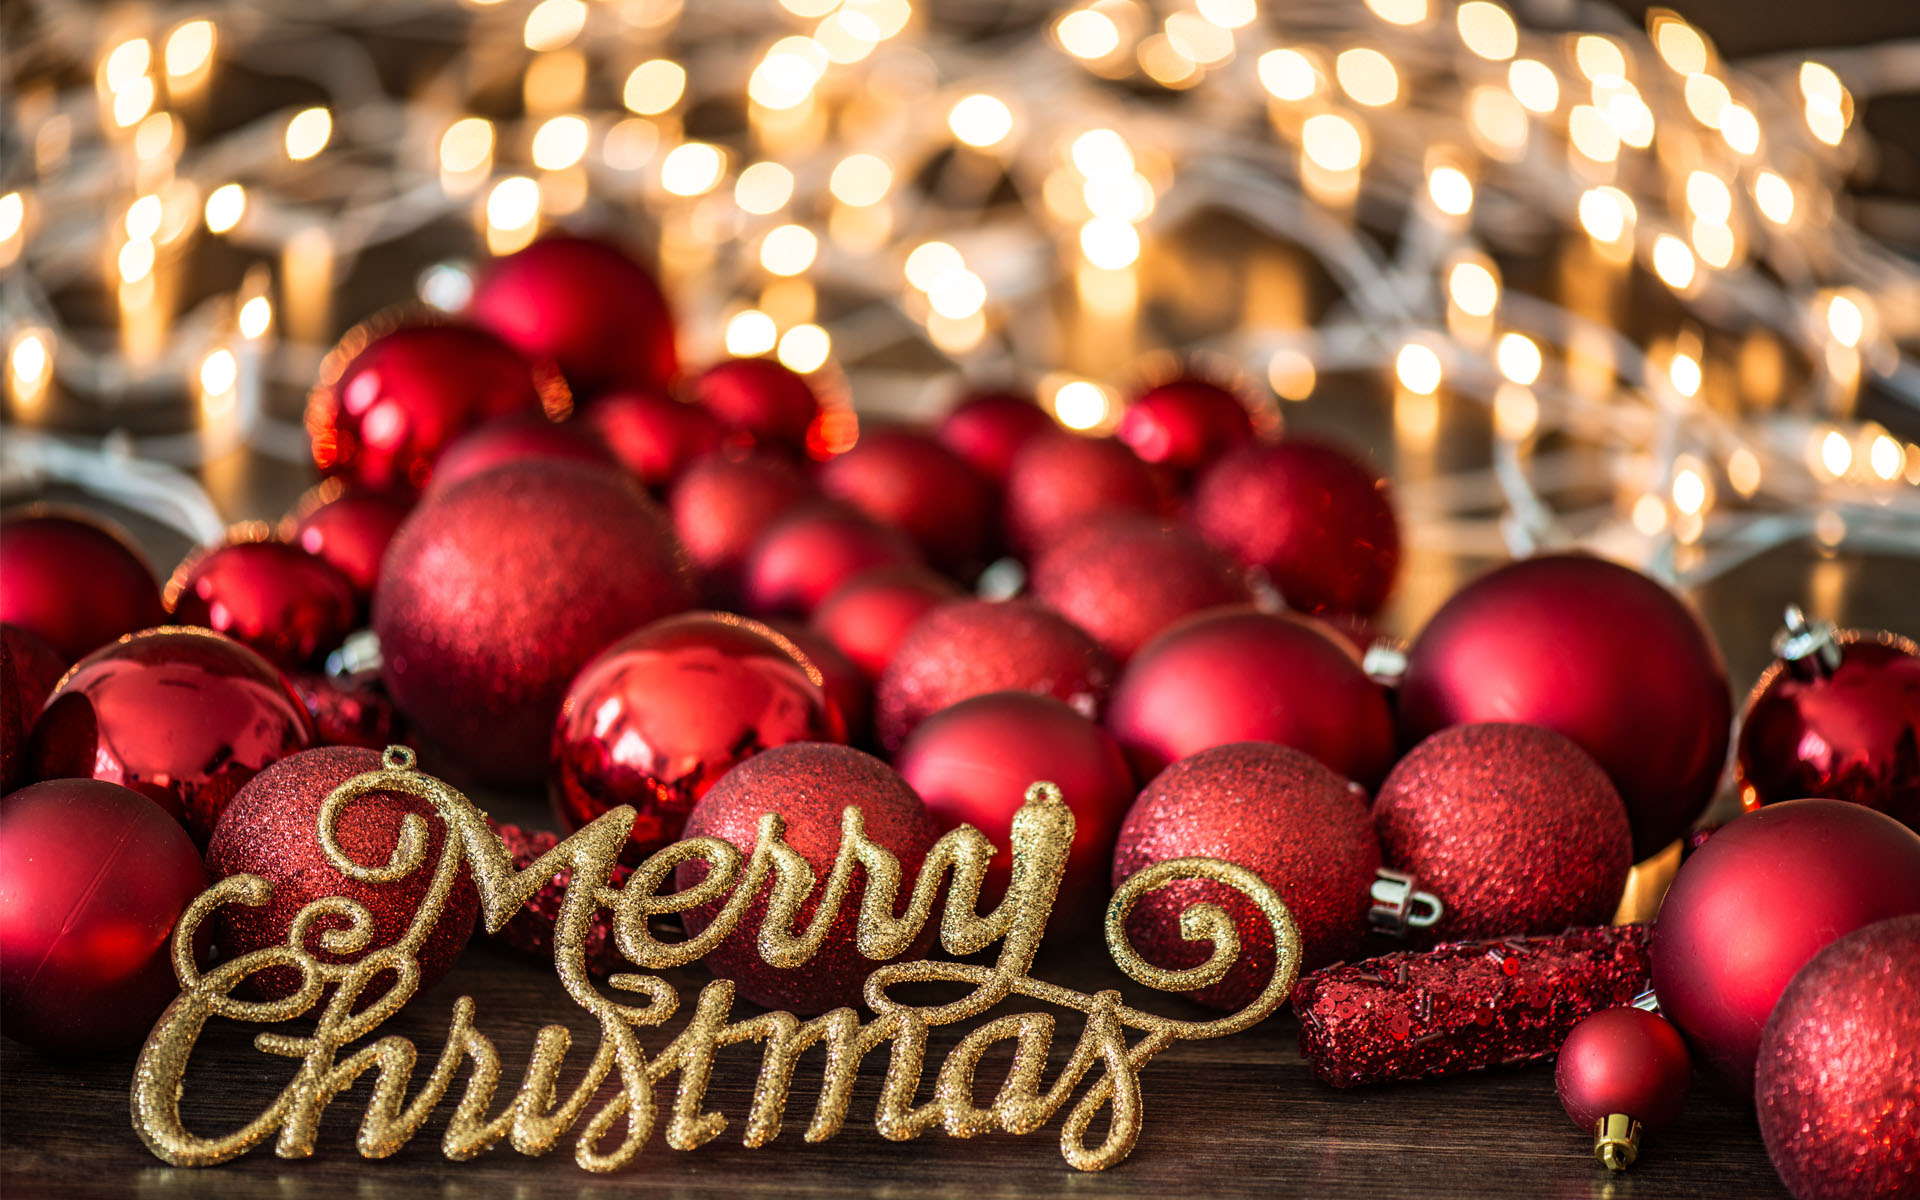 Christmas Celebration Widescreen Wallpapers - Merry Christmas Images Hd -  1920x1200 Wallpaper 